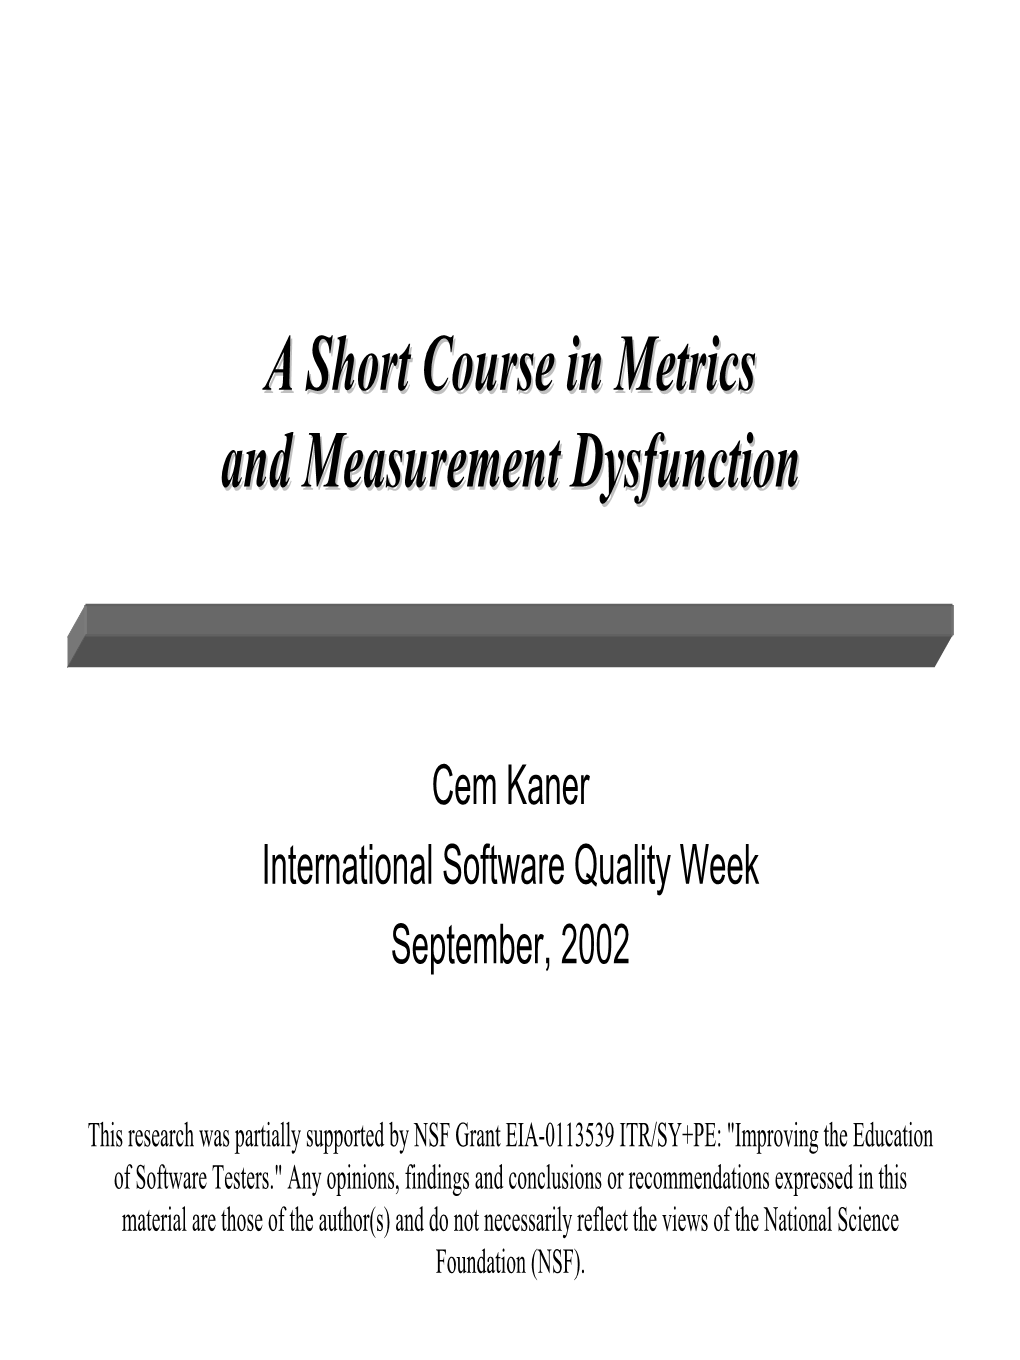 A Short Course in Metrics and Measurement Dysfunction